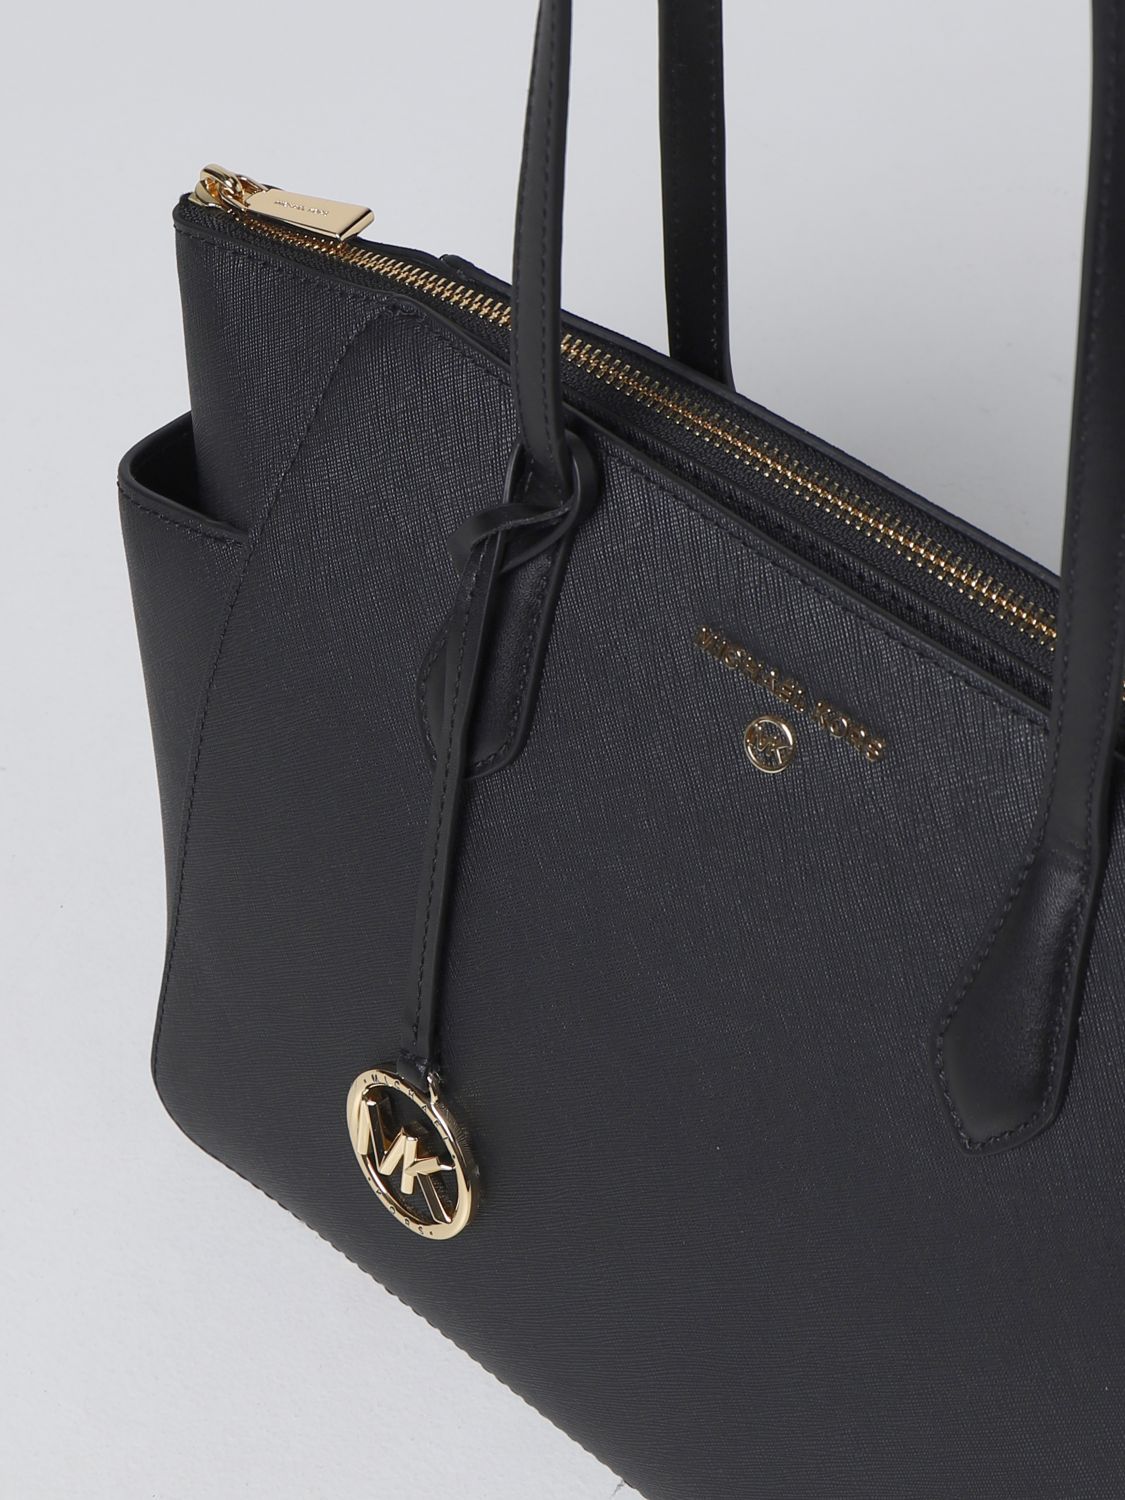 Michael Kors Outlet tote bags for woman  Black  Michael Kors tote bags  30T2SUPT7C online on GIGLIOCOM